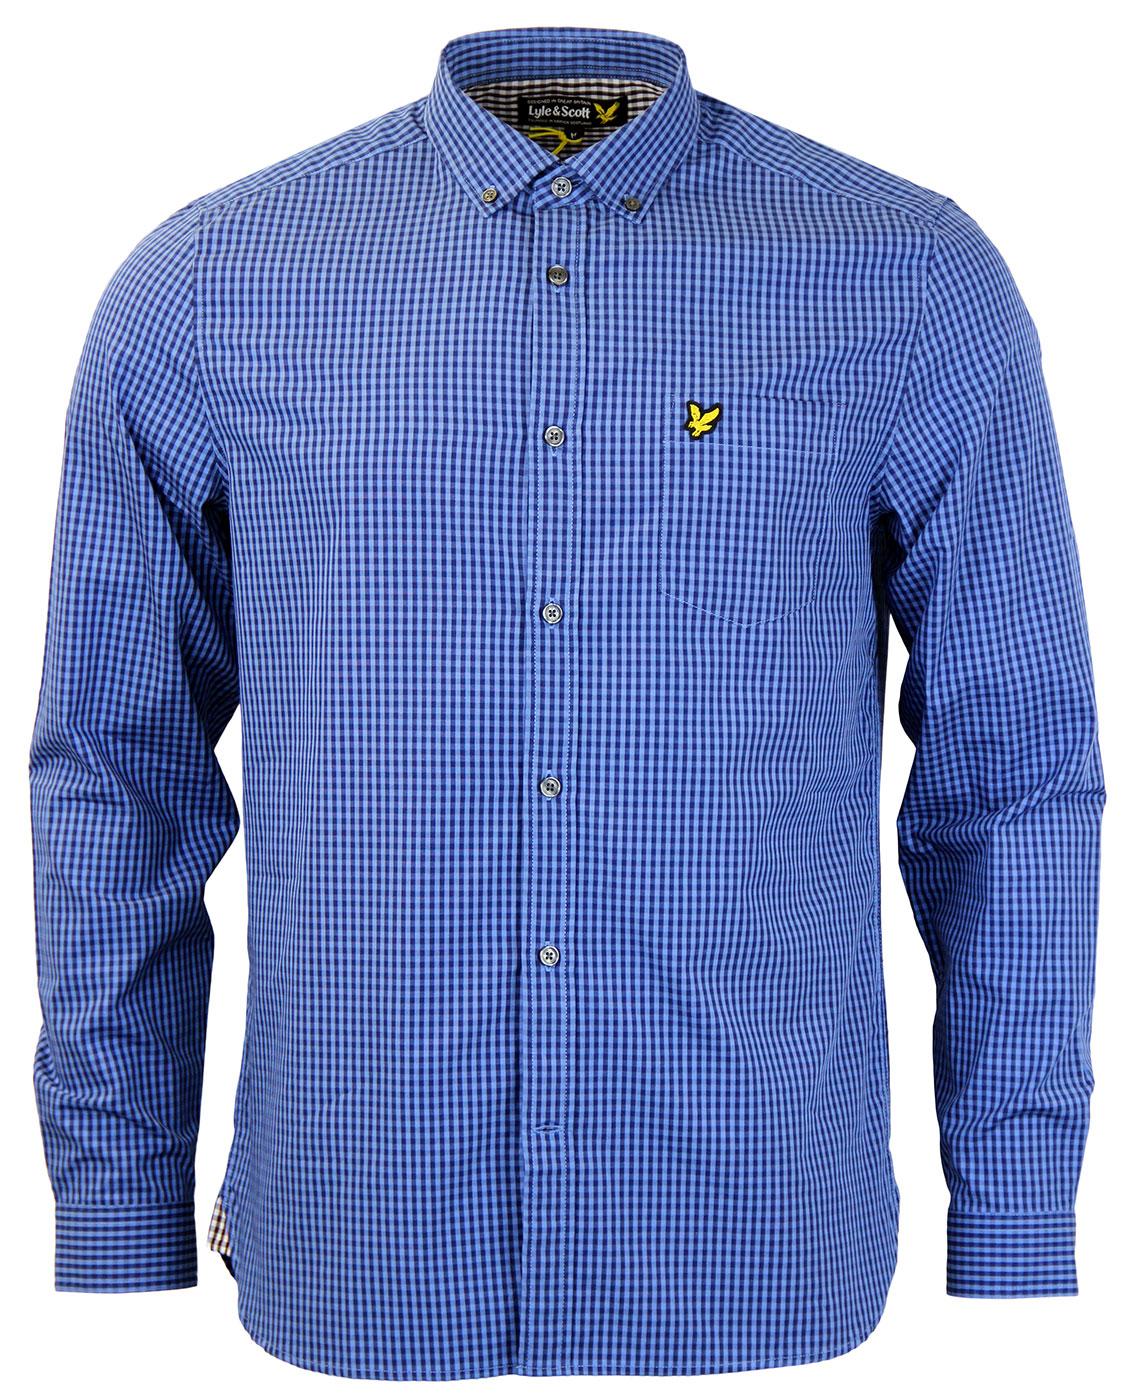 Gingham LYLE AND SCOTT Check Button Down Shirt